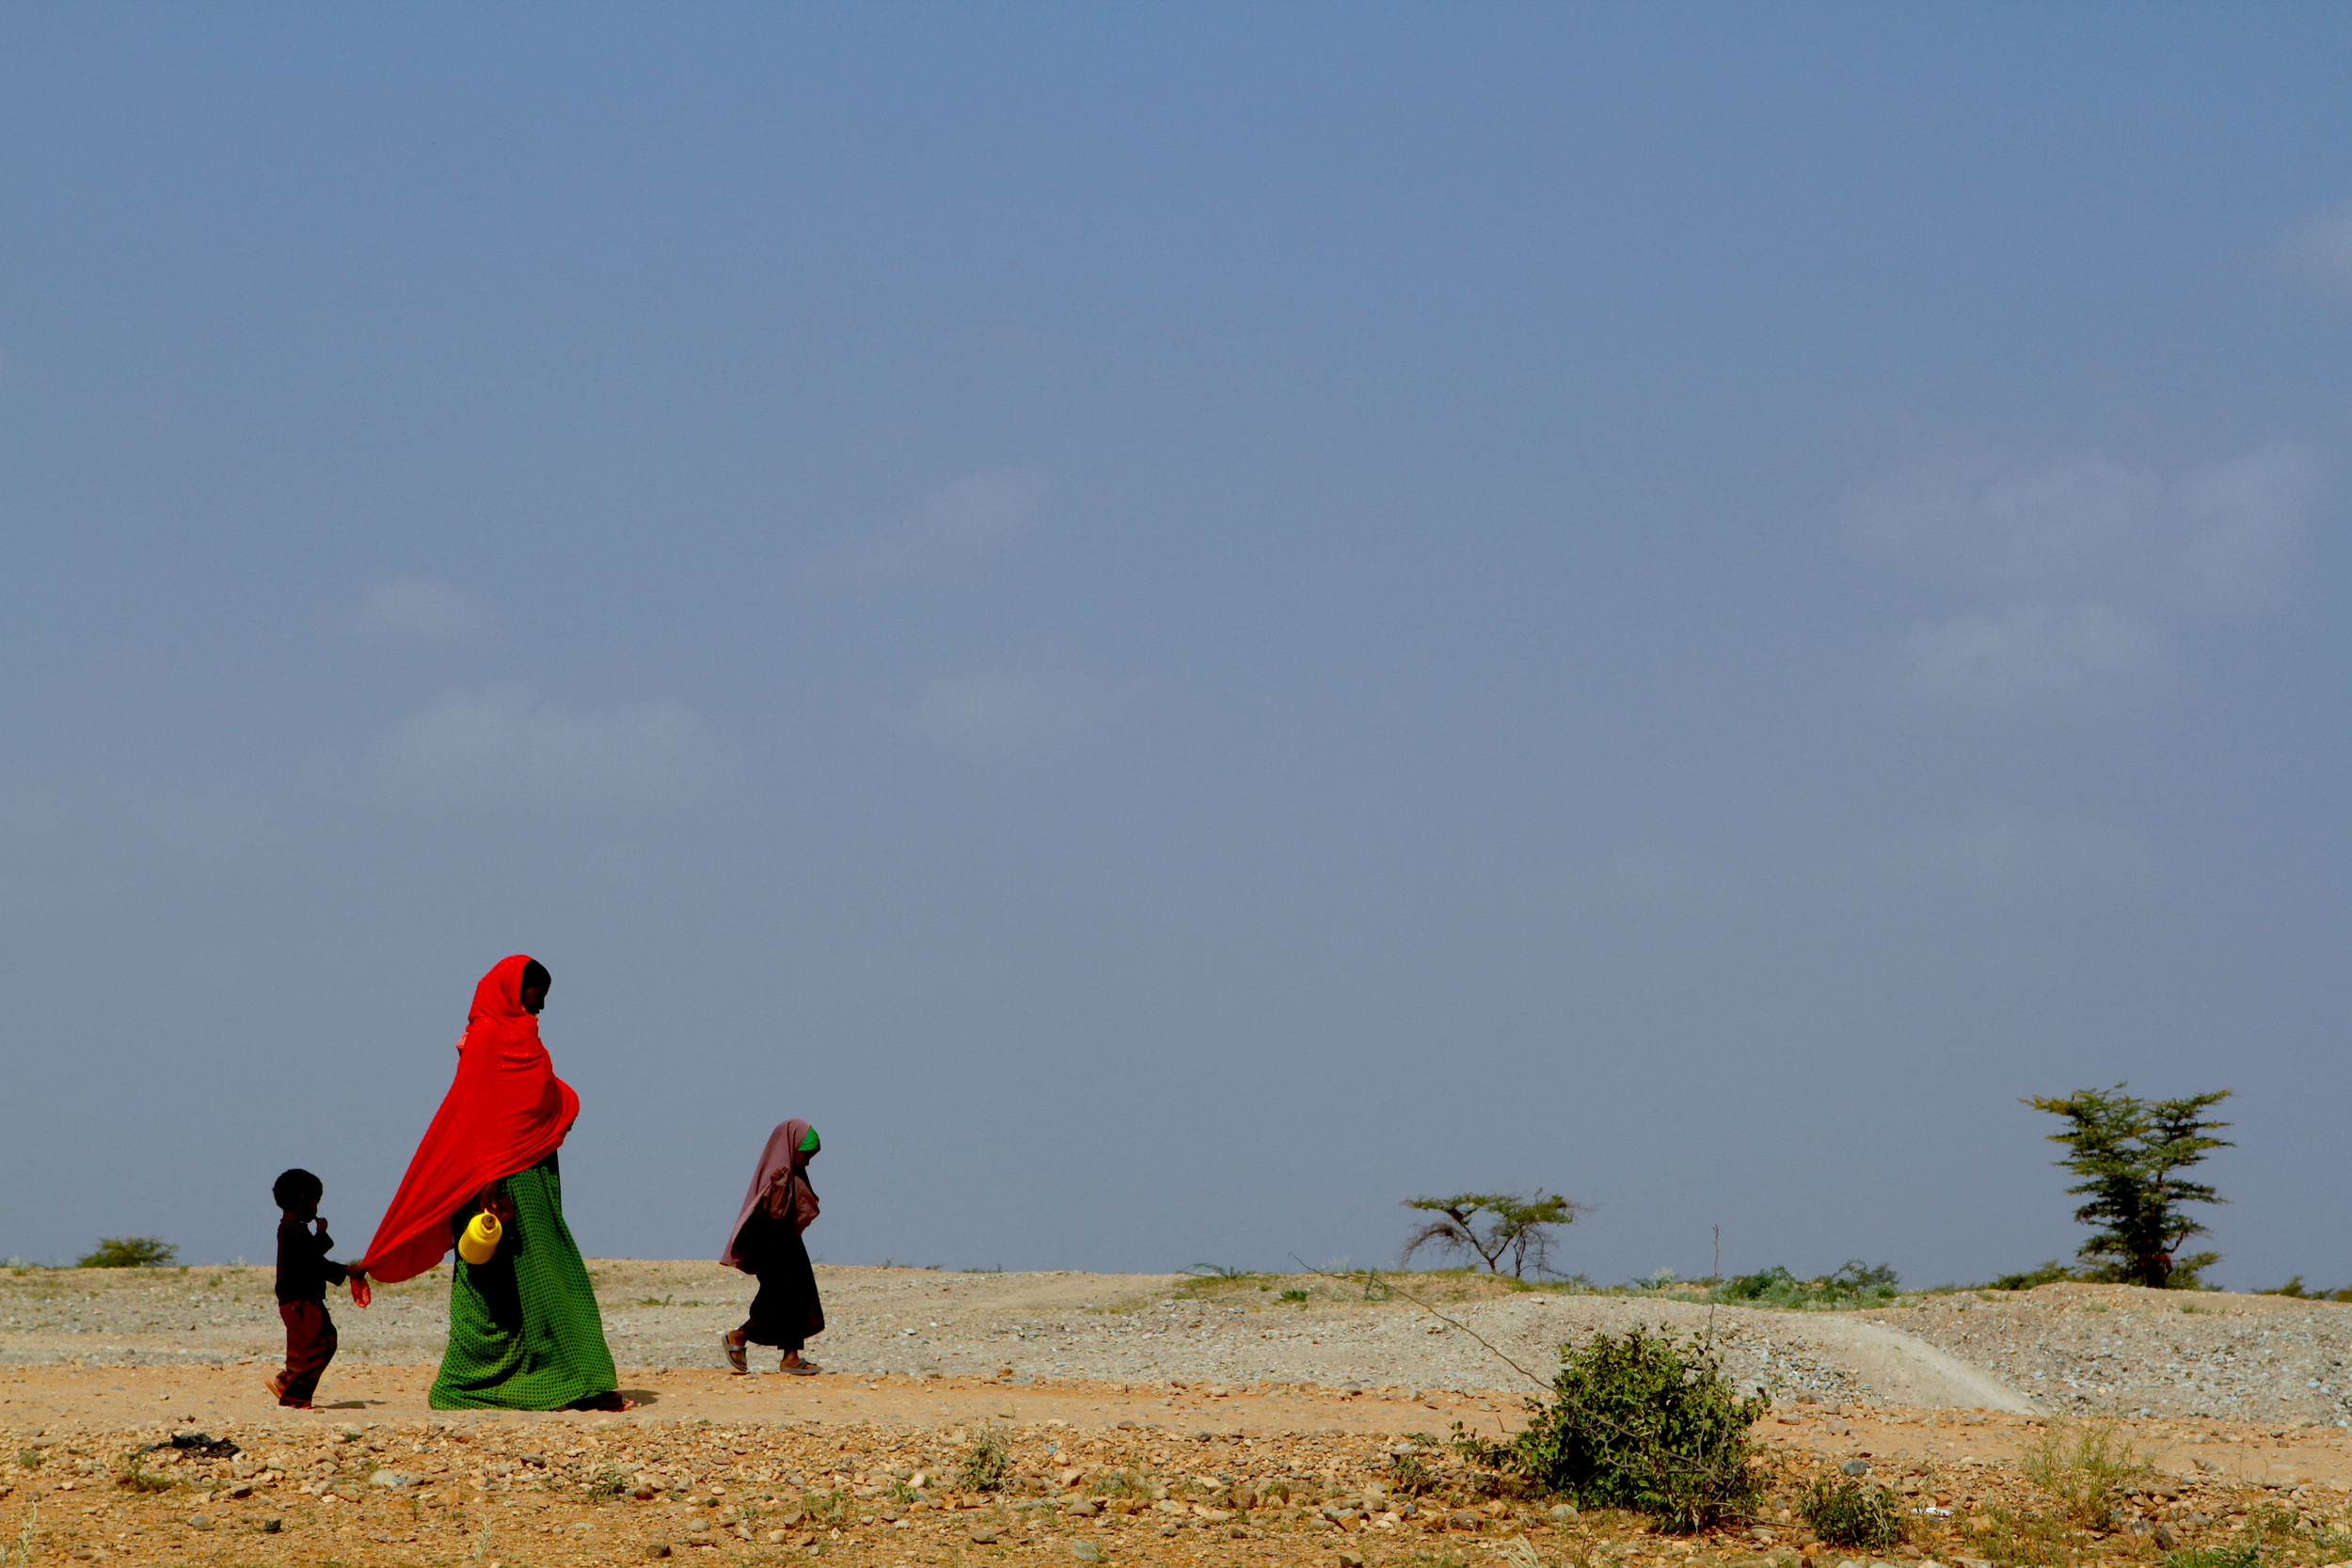 Somali refugees walking to fetch water in the Dolo Ado refugee camp in Ethiopia